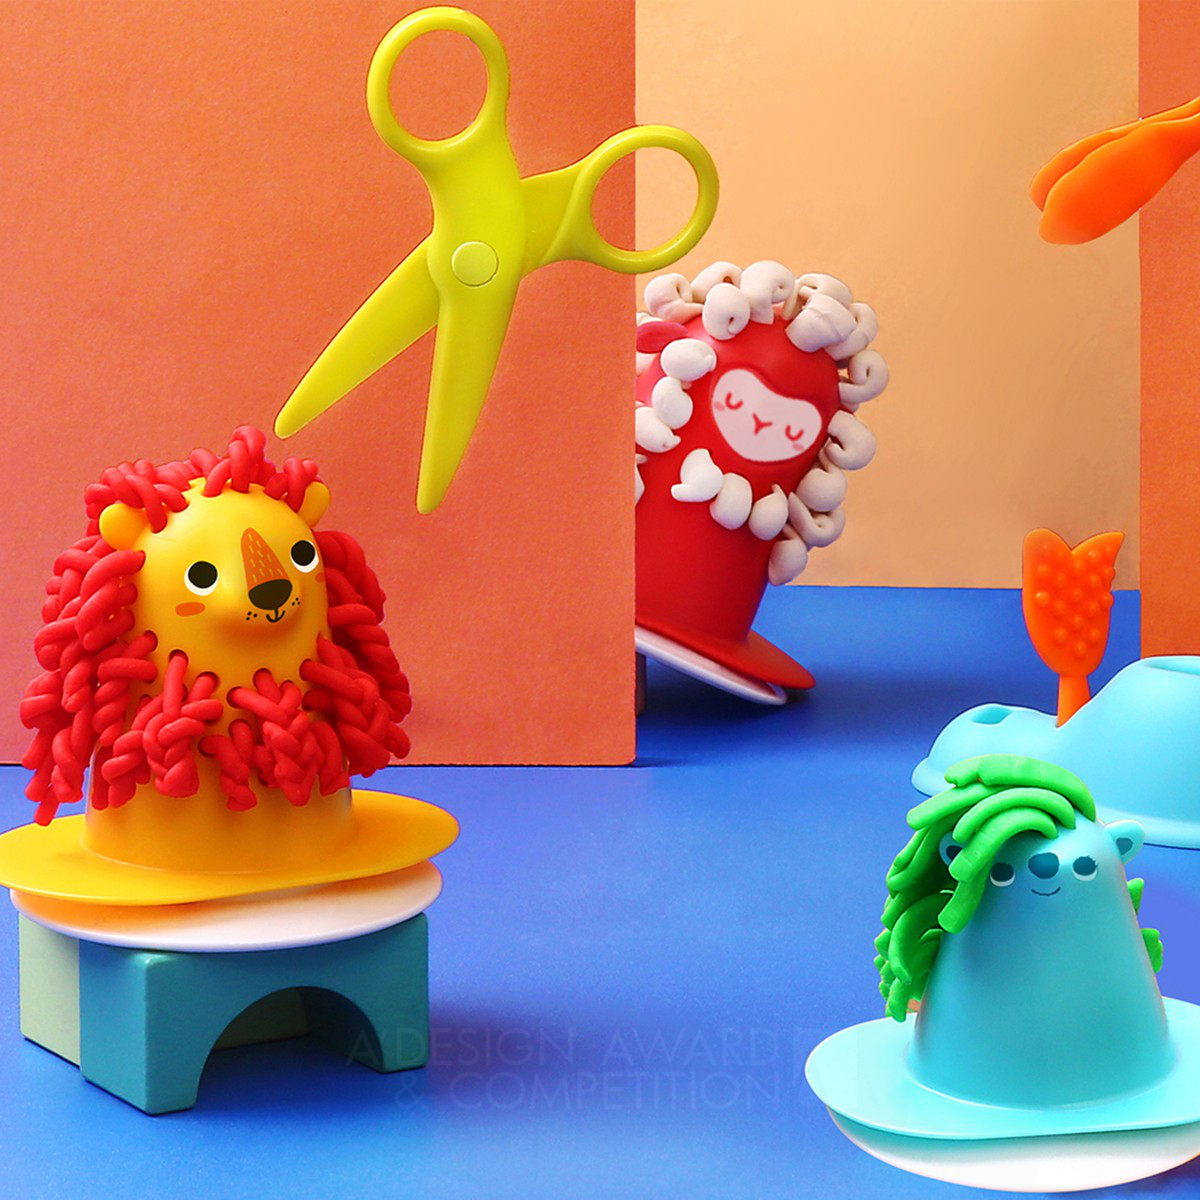 Yi Teng Shih wins Bronze at the prestigious A' Toys, Games and Hobby Products Design Award with Hair Salon Animal Toy.